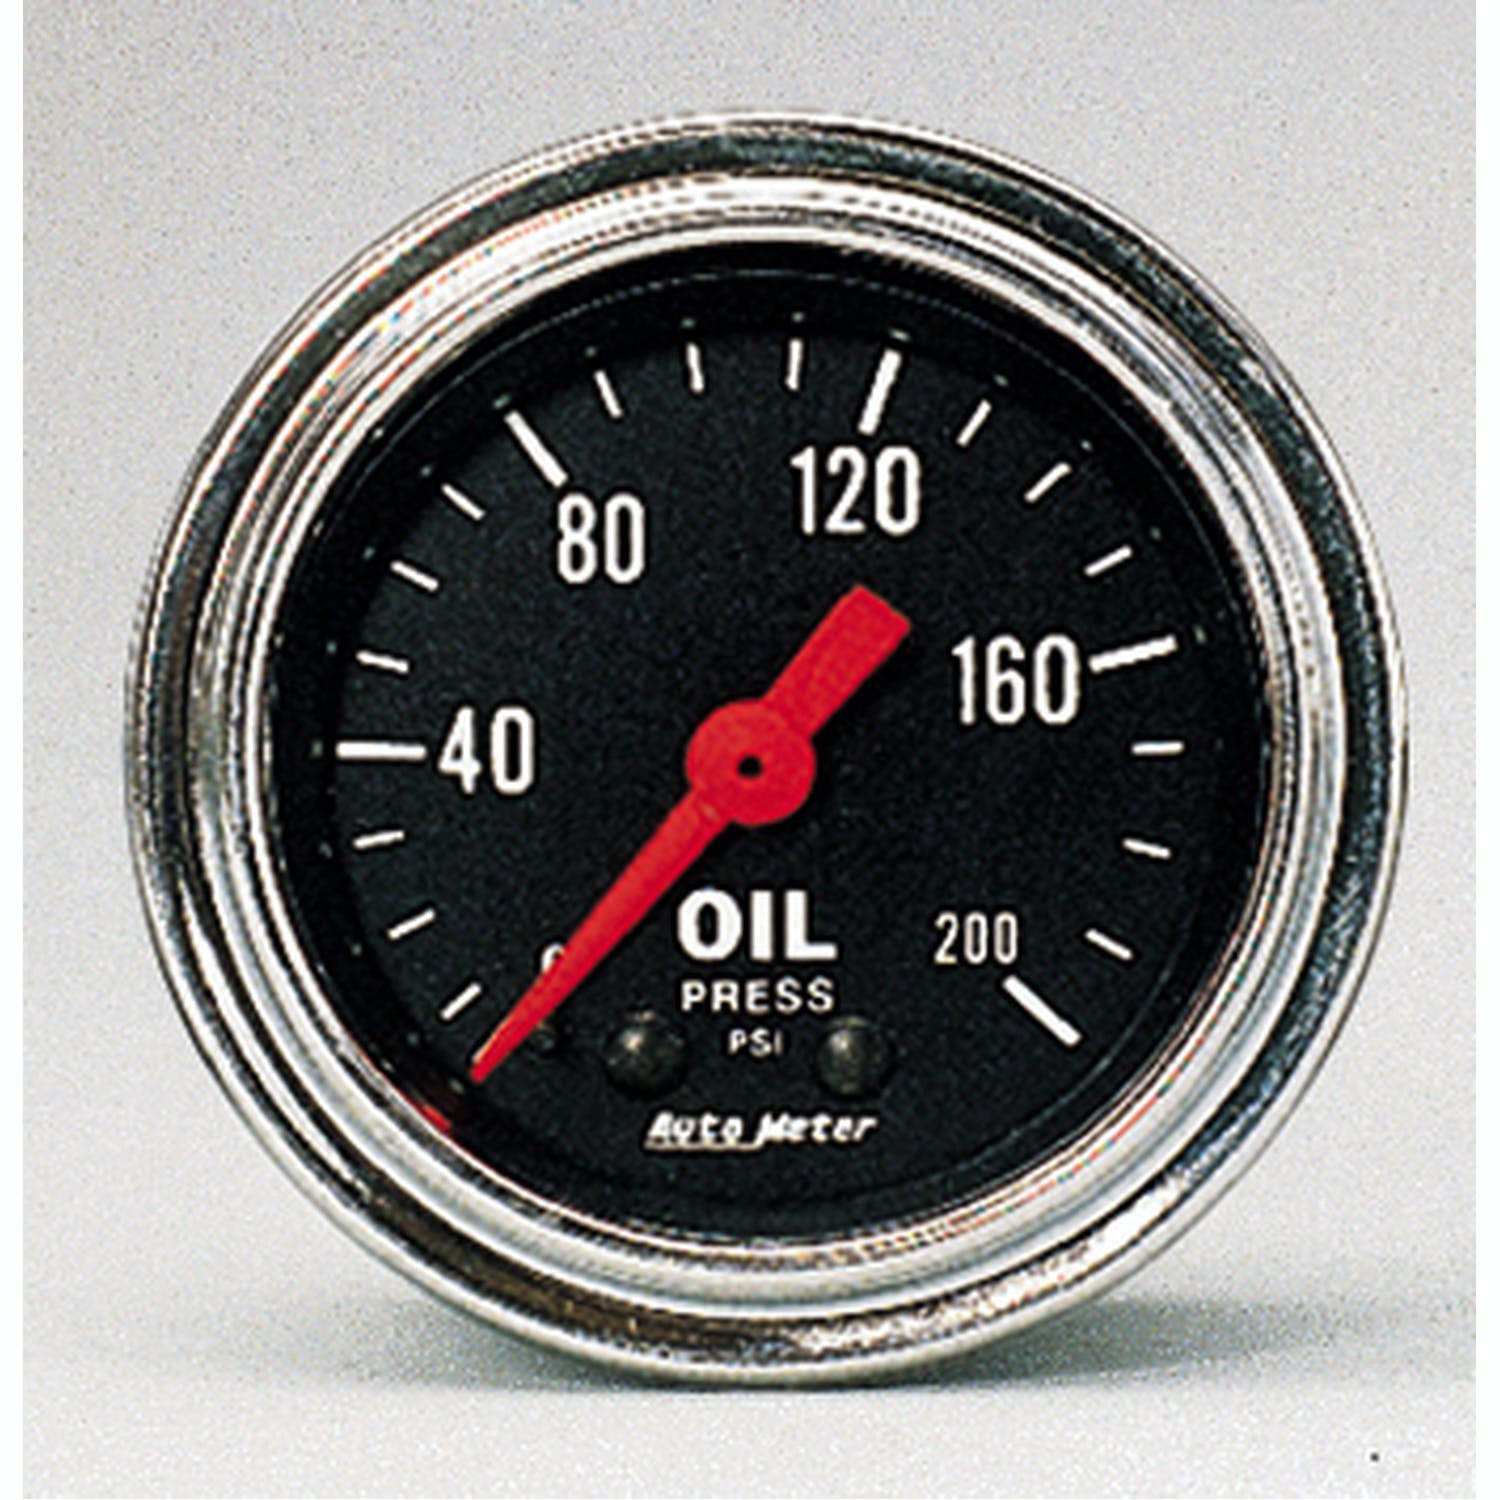 AutoMeter Products 2422 Oil Pressure Gauge 0-200 PSI